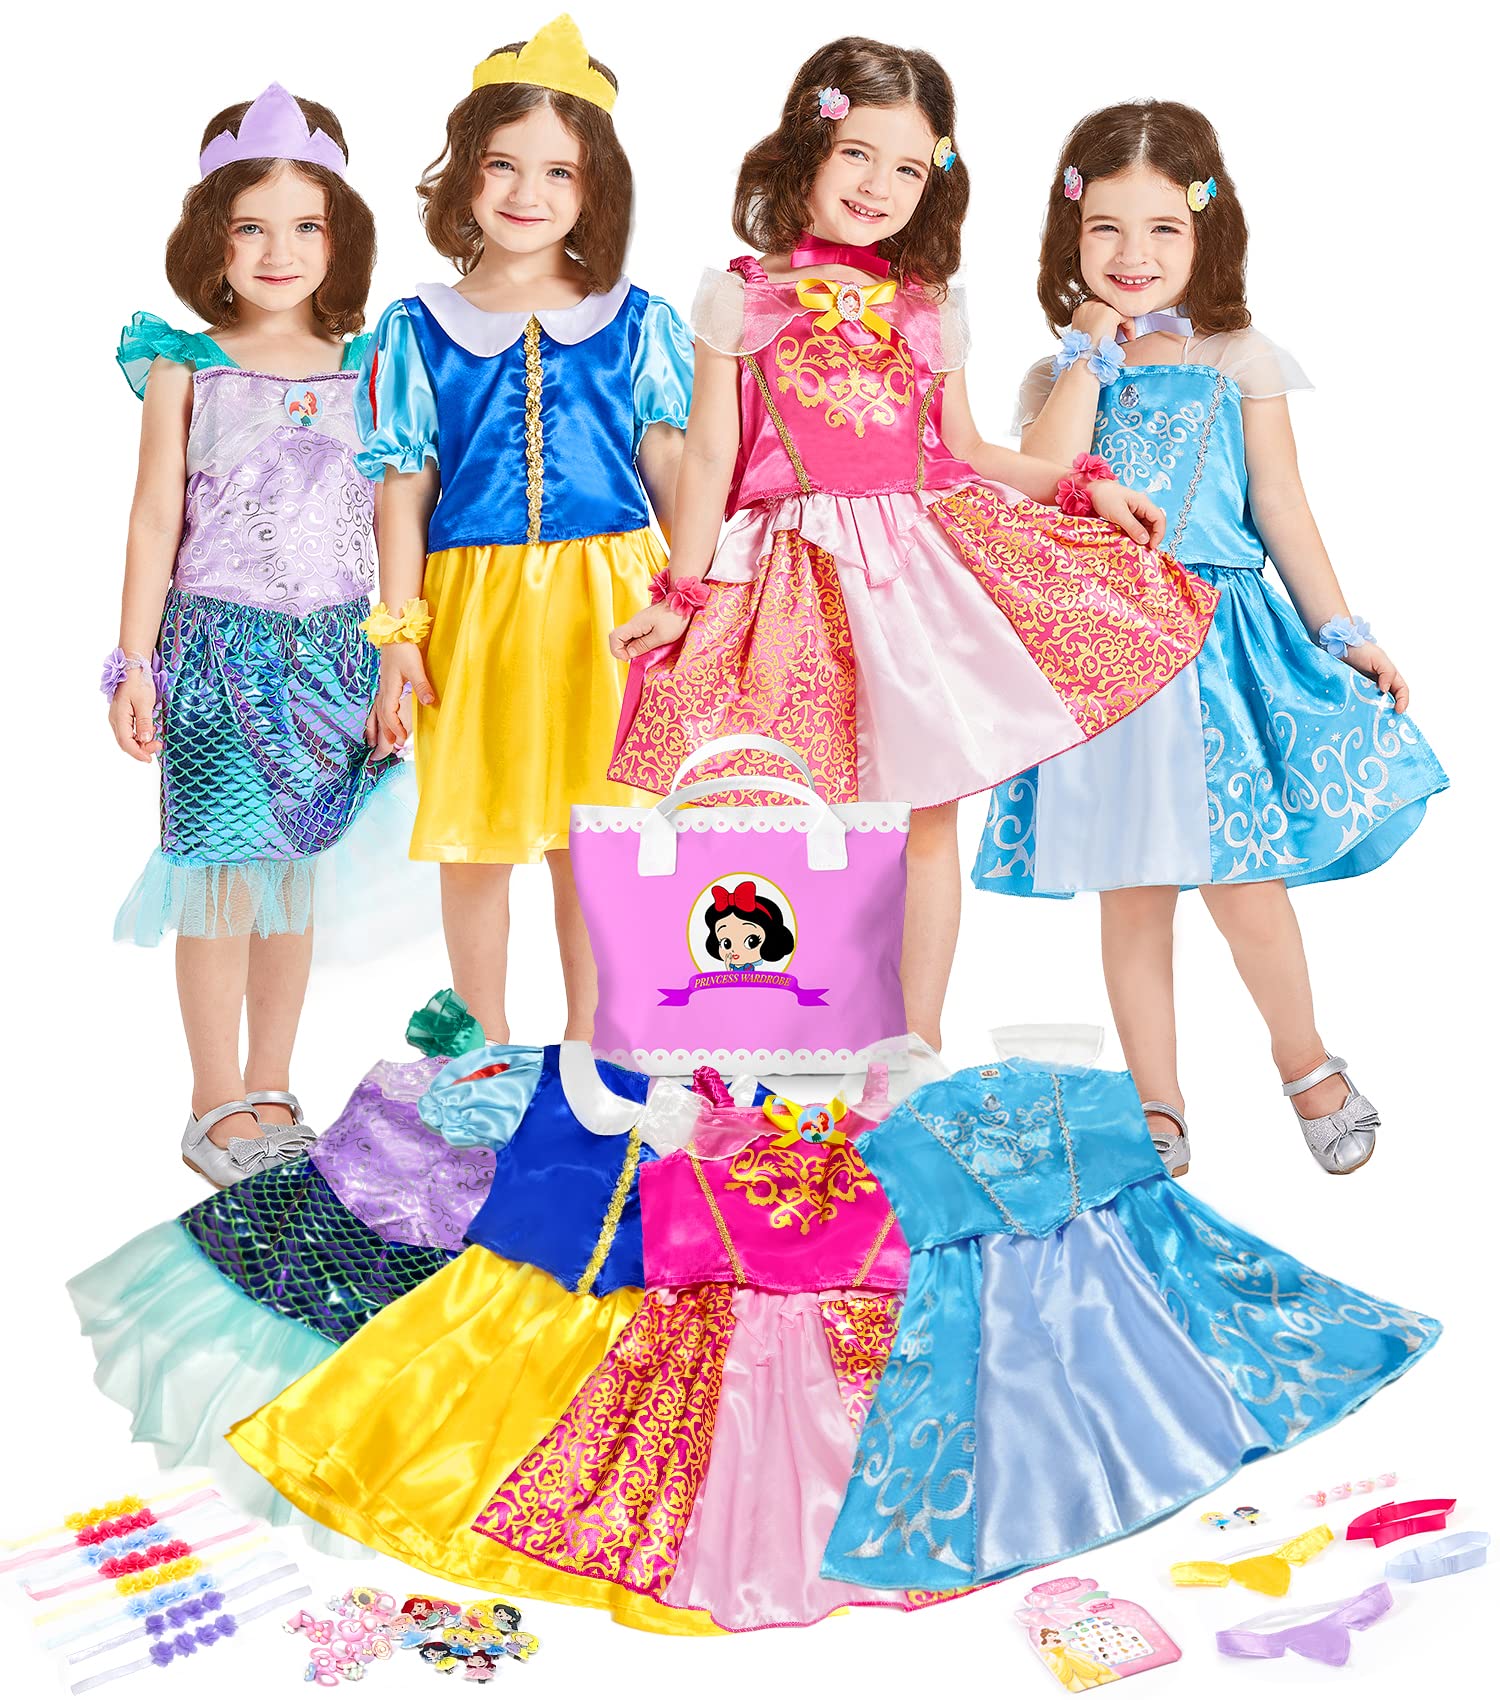 Princess Dress Up Clothes for Little Girls Costume Trunk 32 Piece Pretend Role Play Dresses Age 3-6 Years